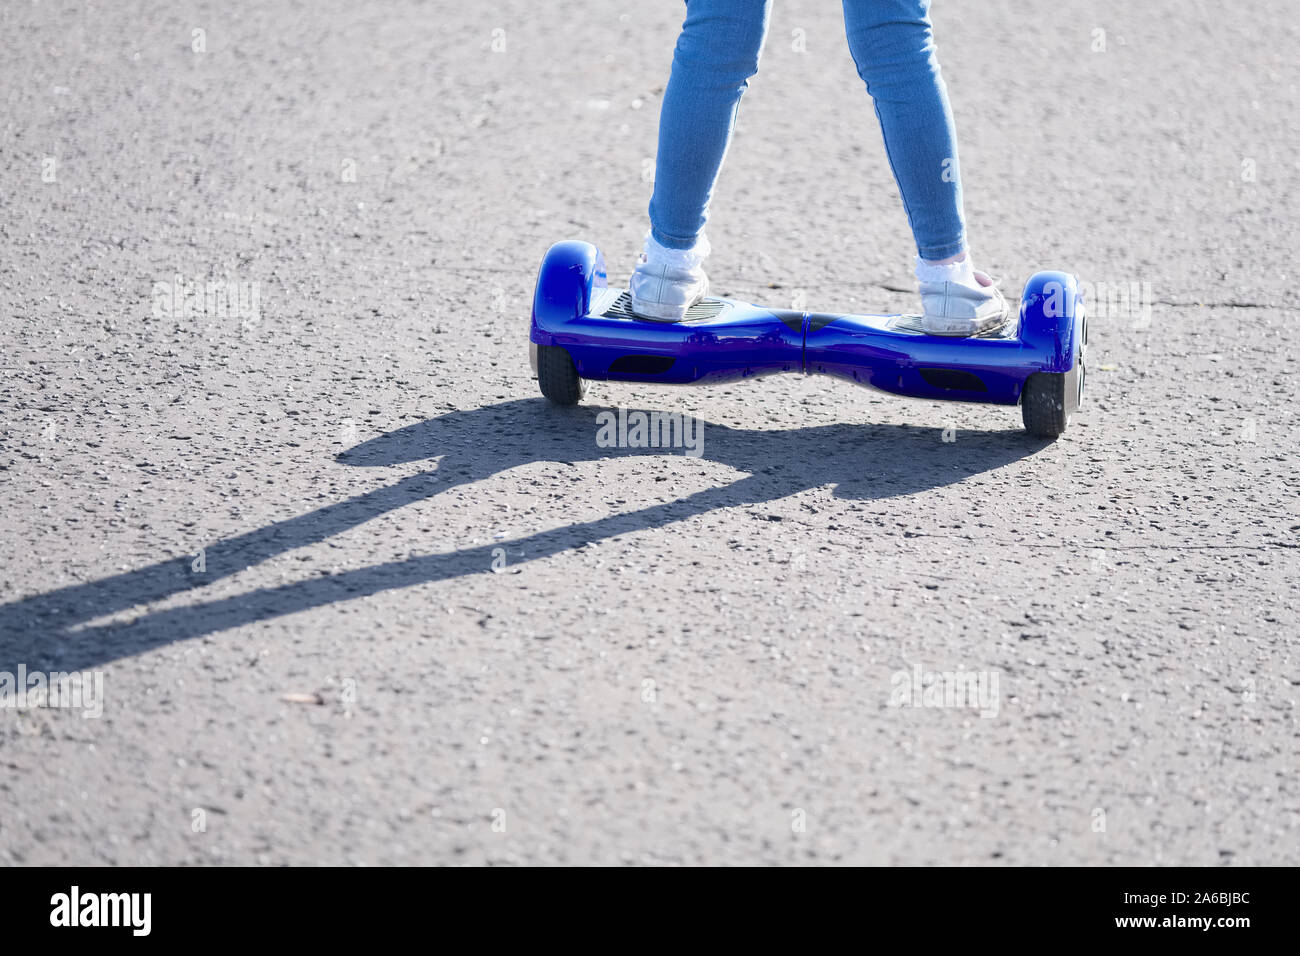 Girl riding blue electric battery powered hoverboard for balance activity close up in summer sun Stock Photo